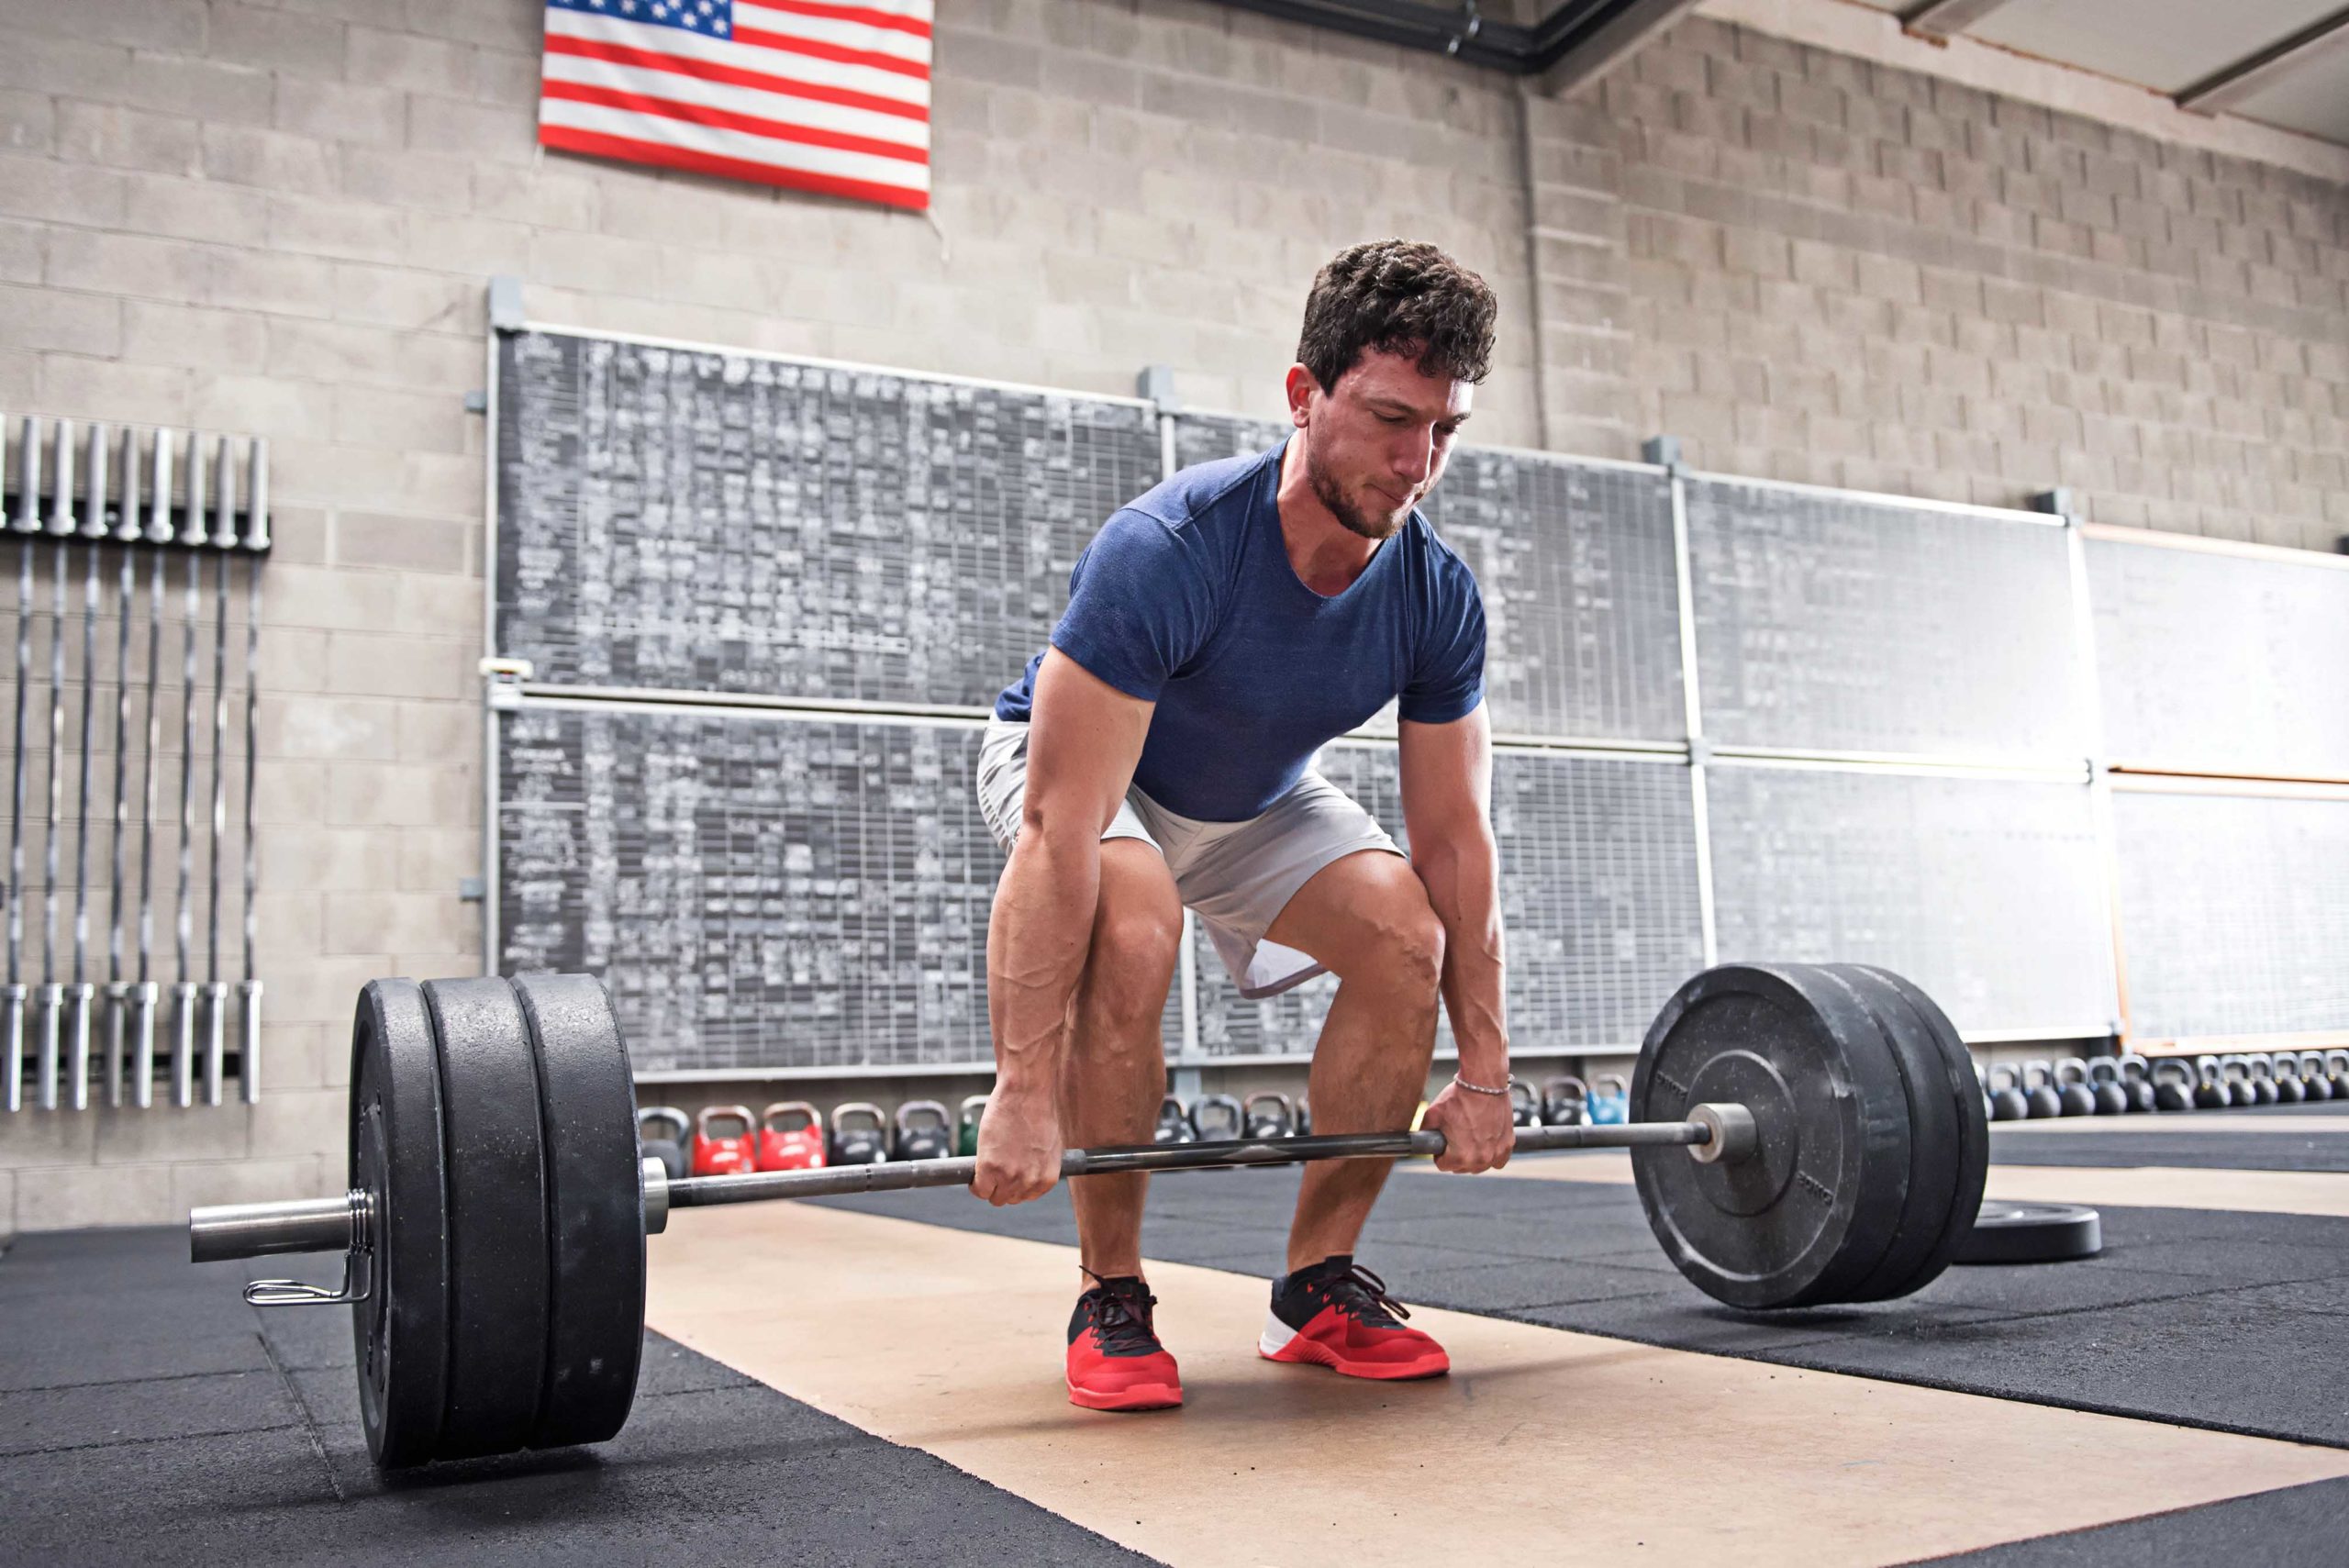 Try These 5 Core Exercises to Improve Your Squat and Deadlift